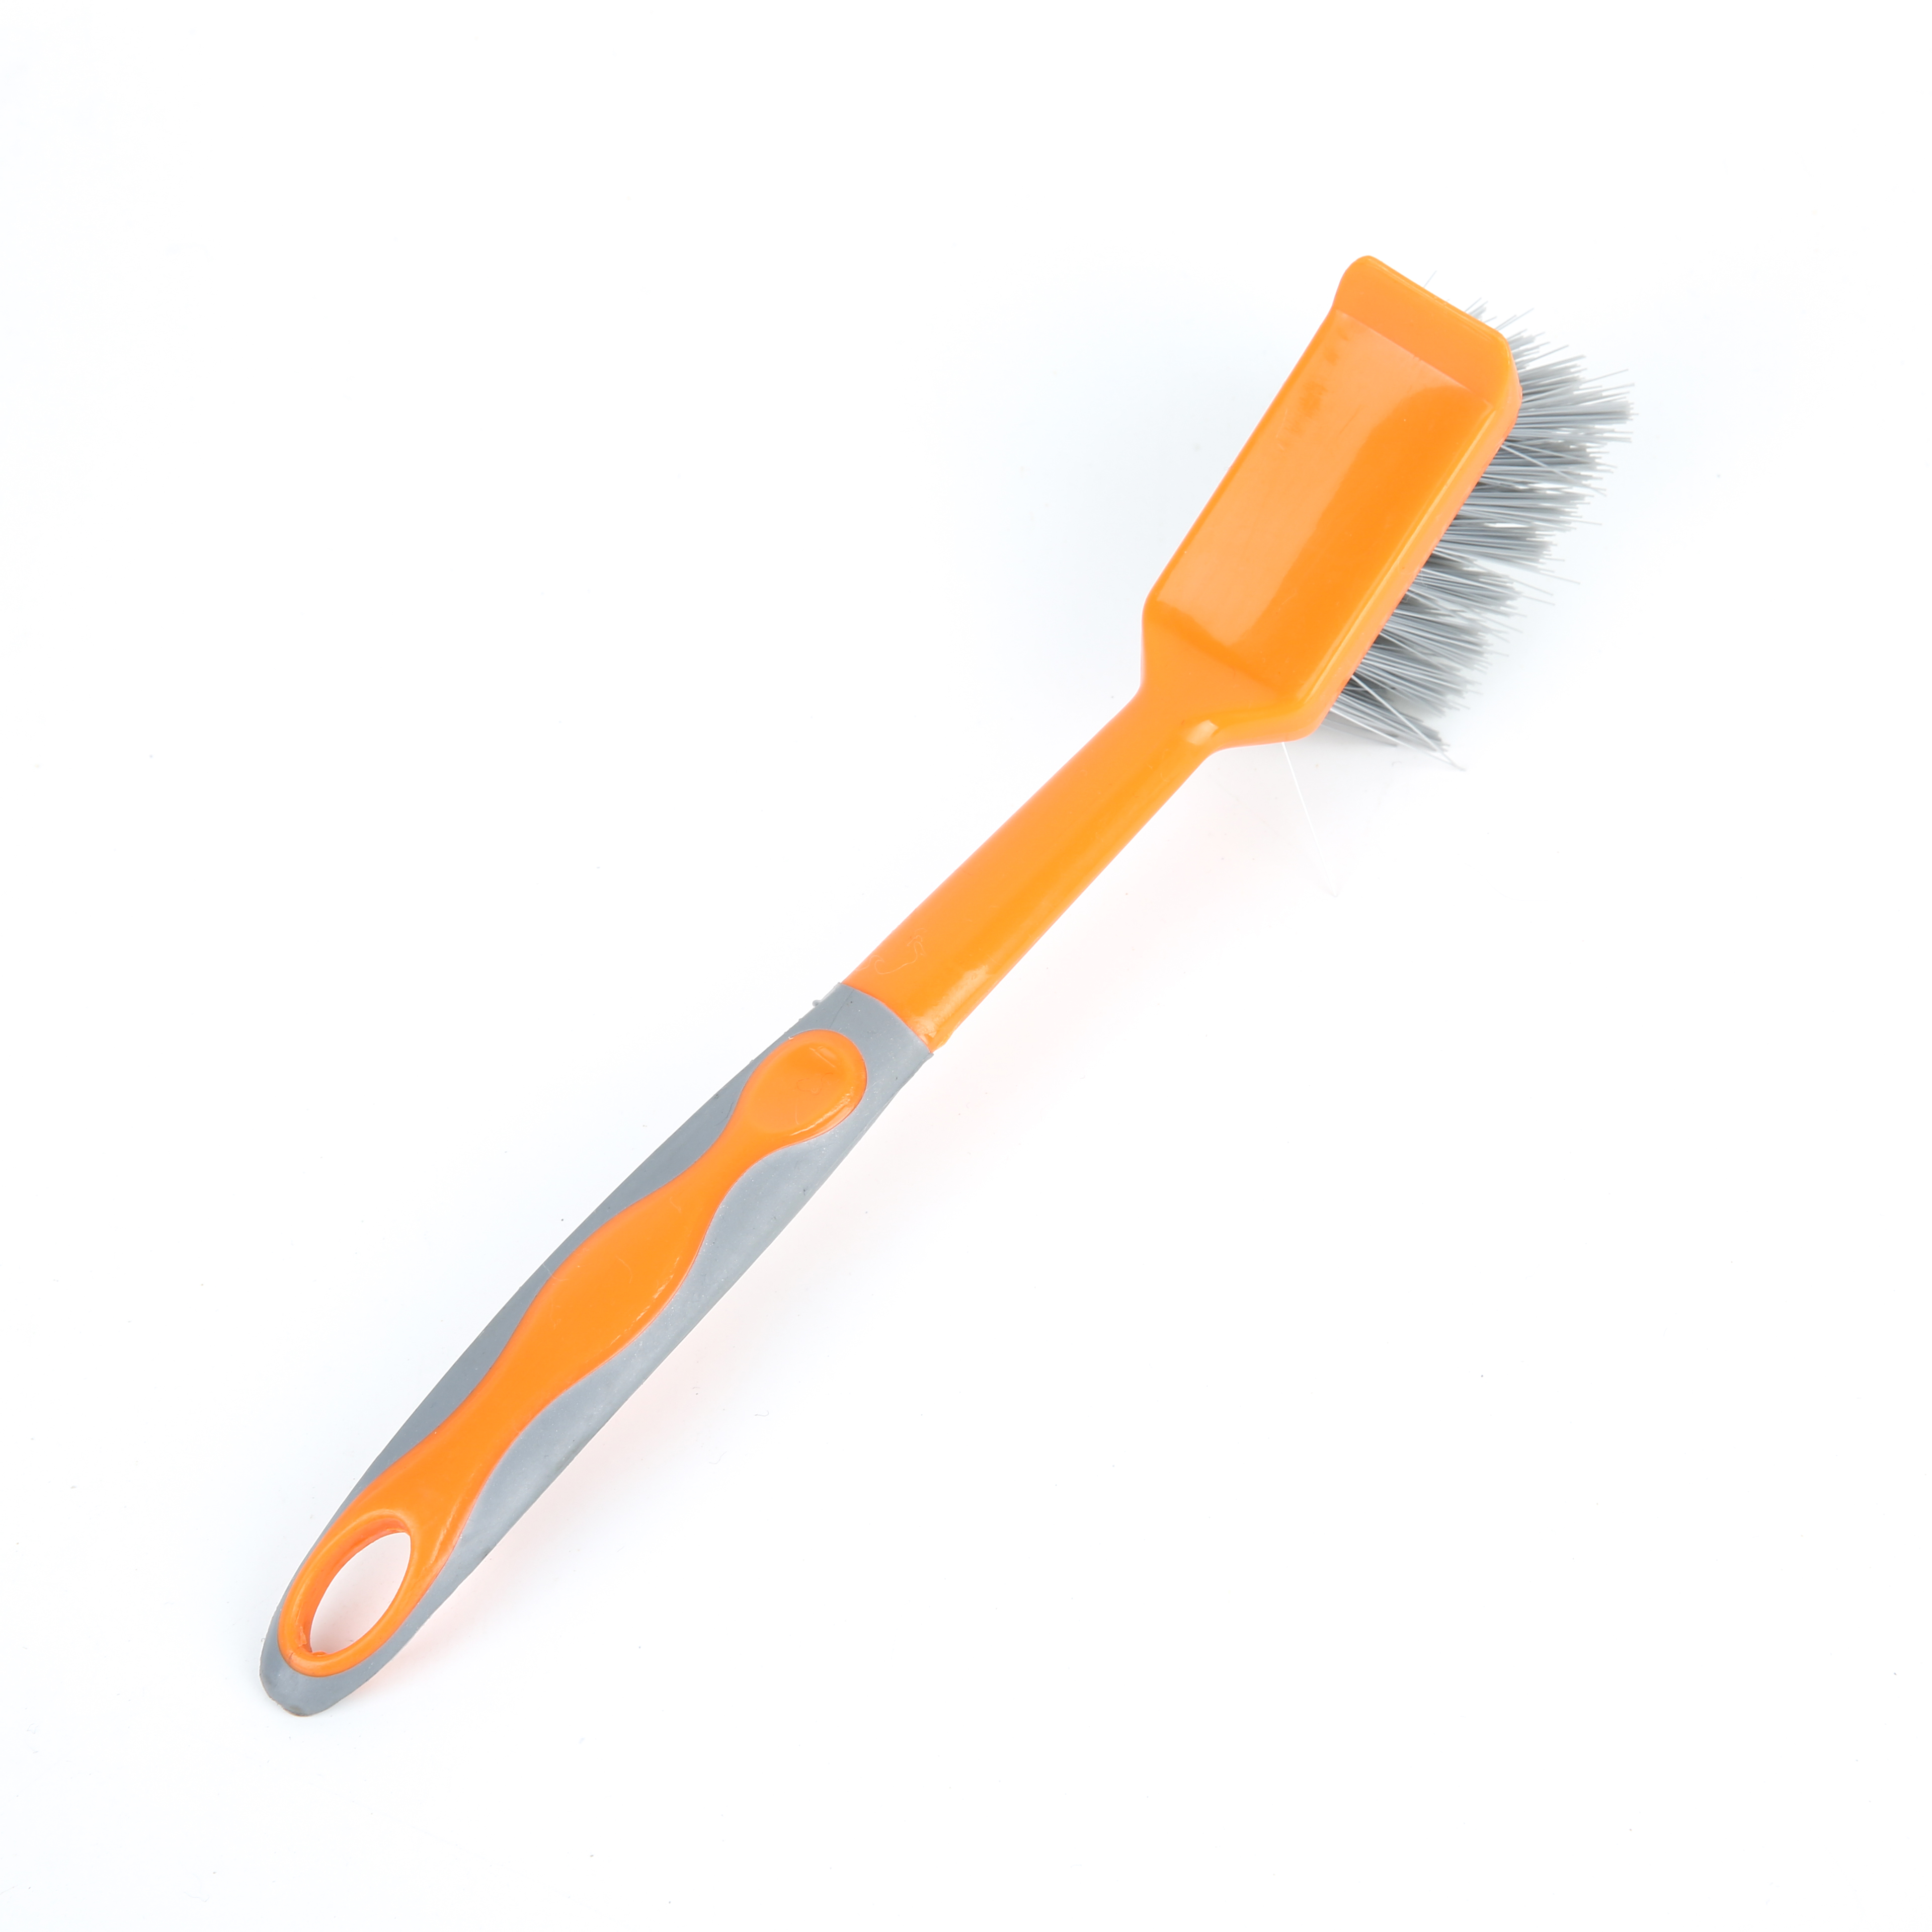 Pp&tpr Kitchen Household Tools Cleaning Dish Brush